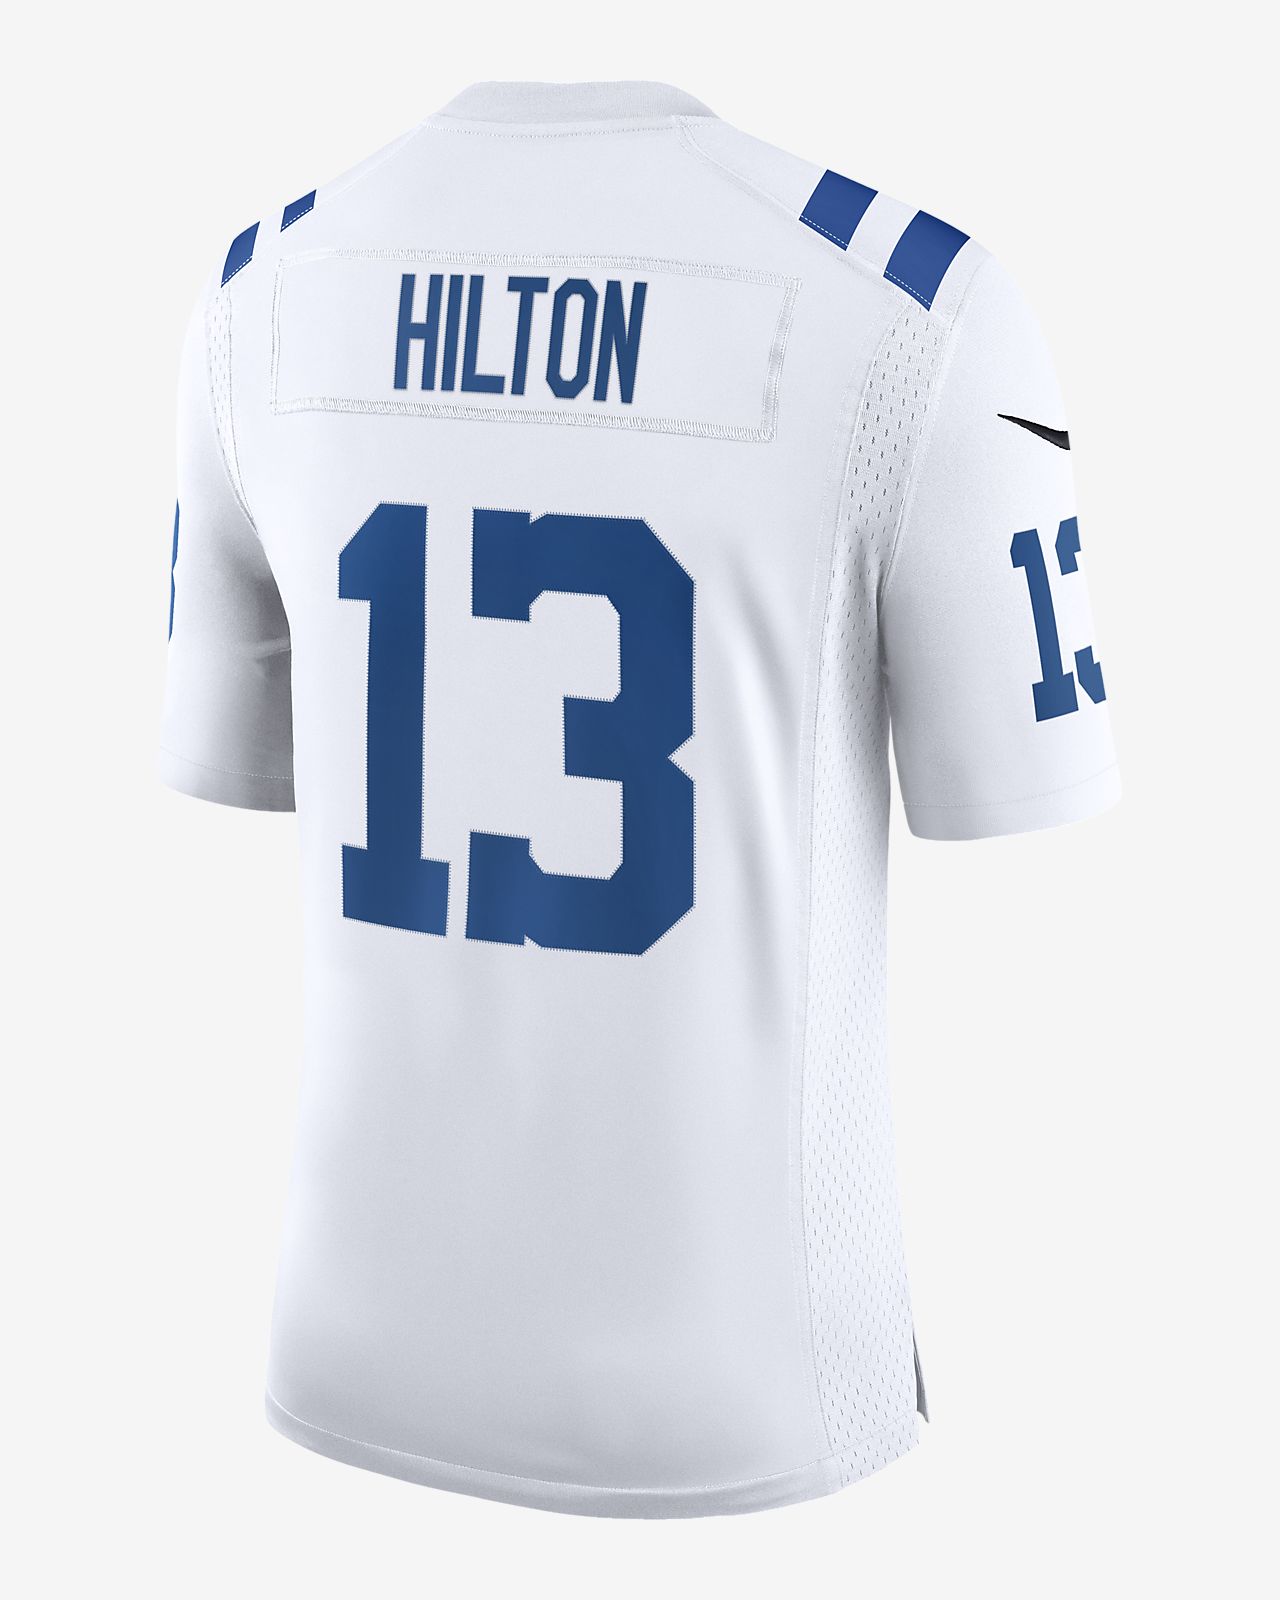 mens colts jersey